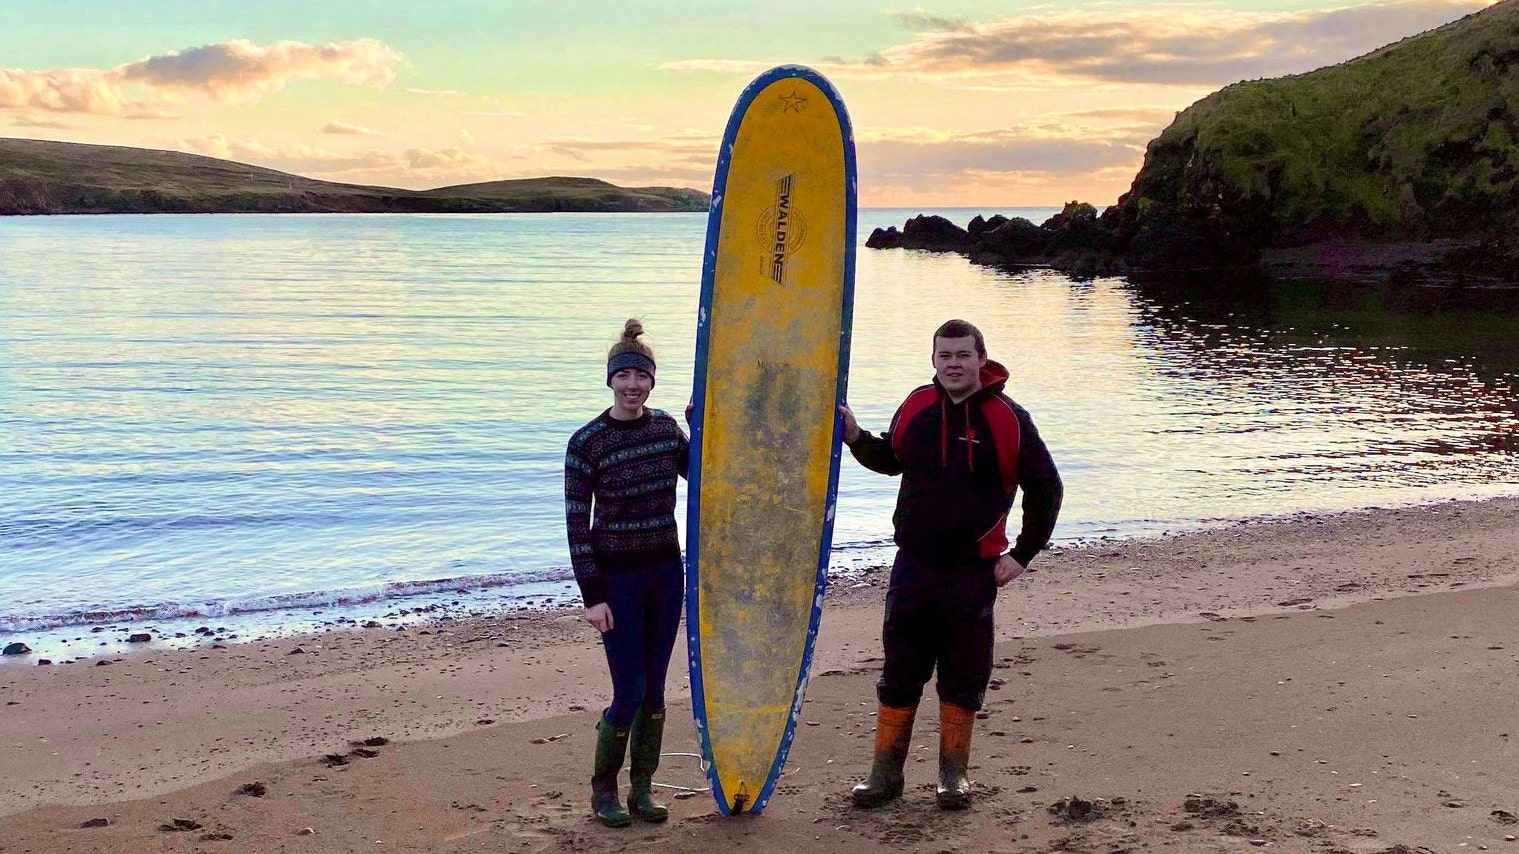 The British man’s lost surfboard returned after drifting 400 kilometers to Shetland Islands